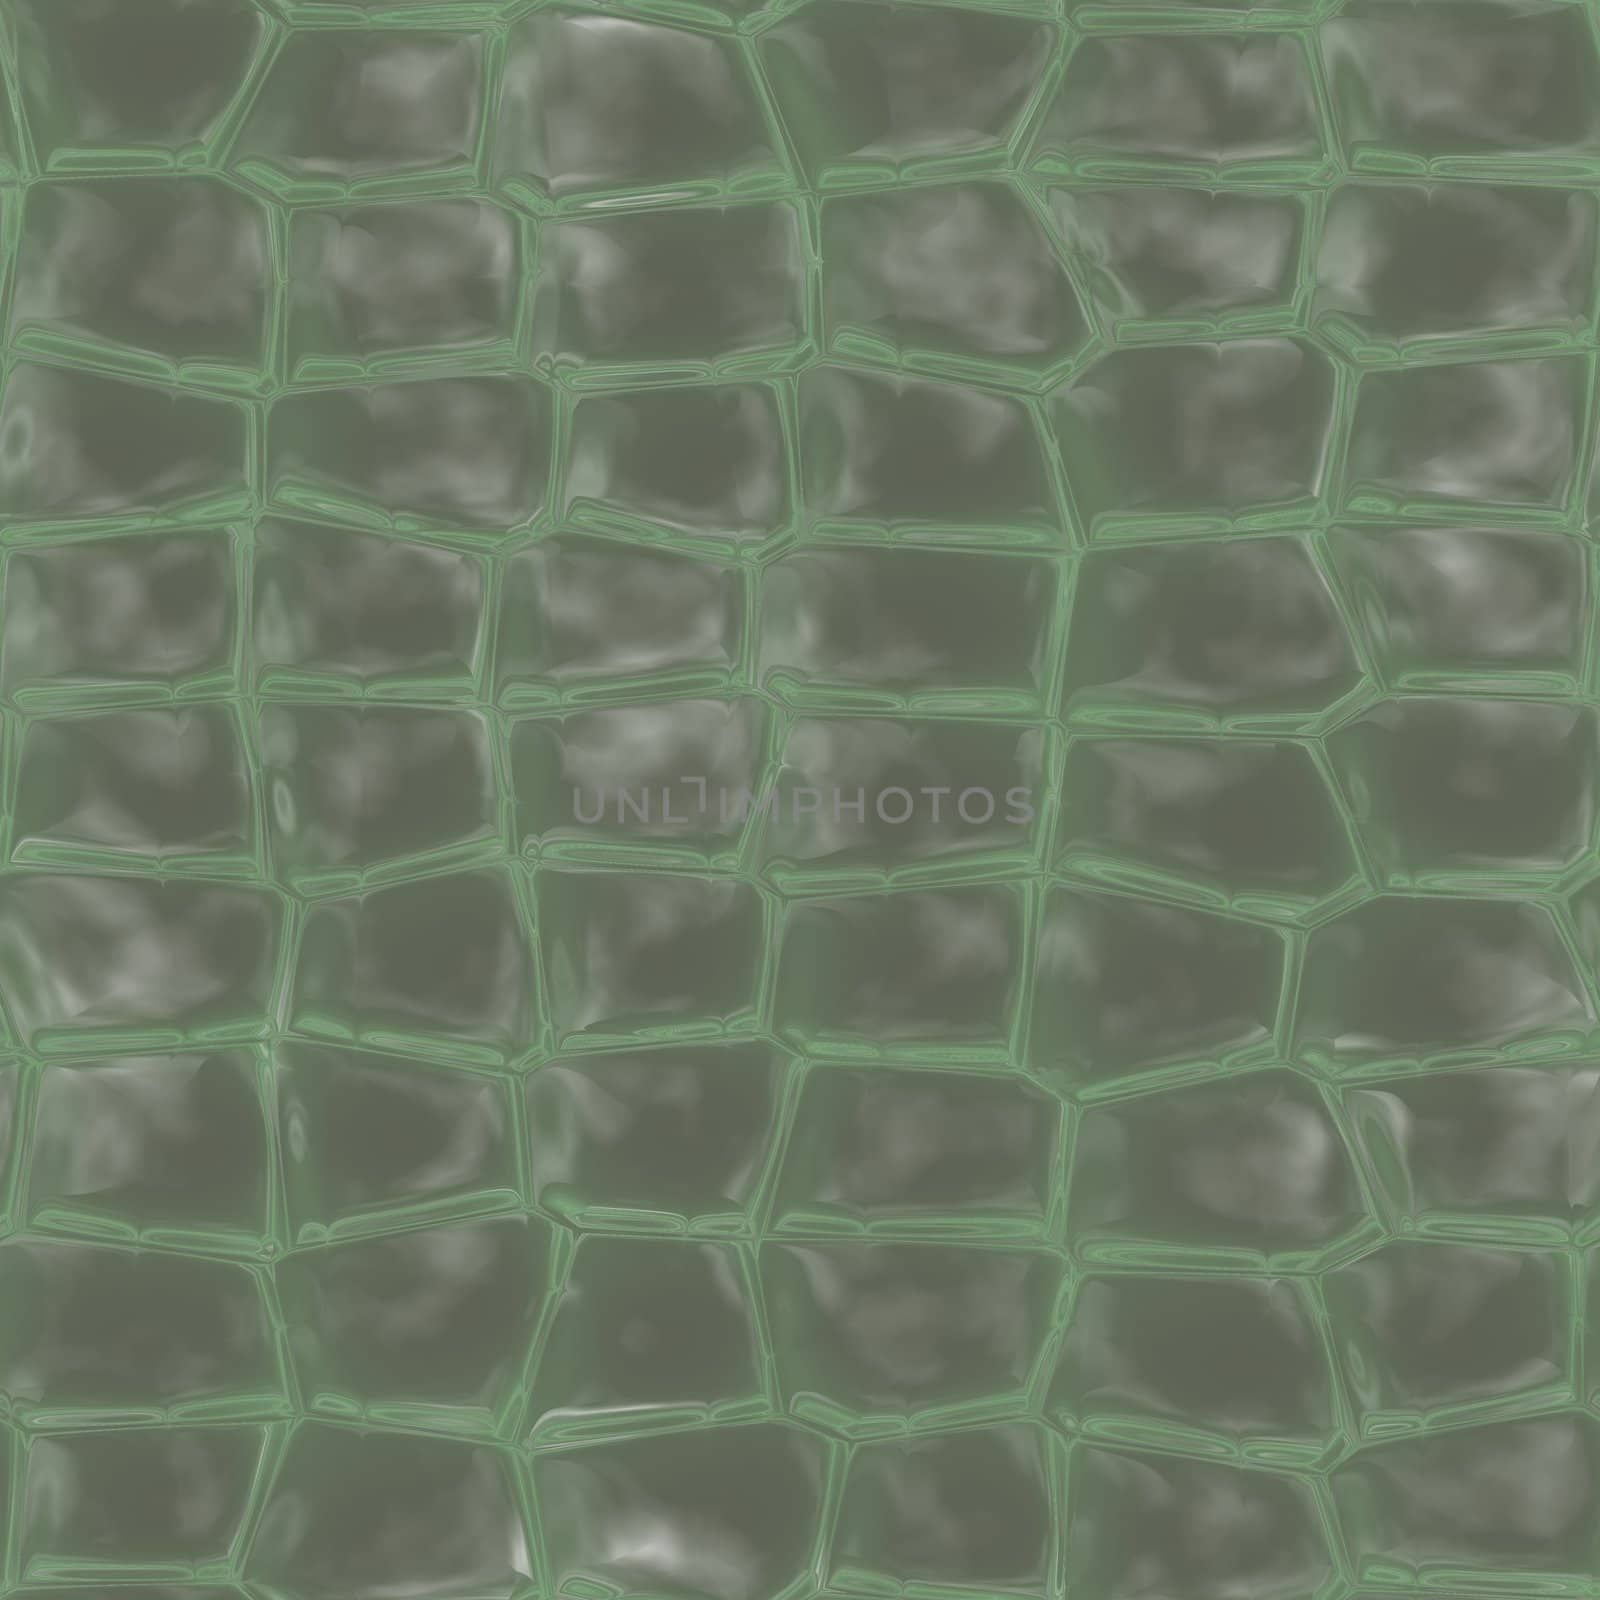 The texture alligator skin,  suits for duplication of the background, illustration